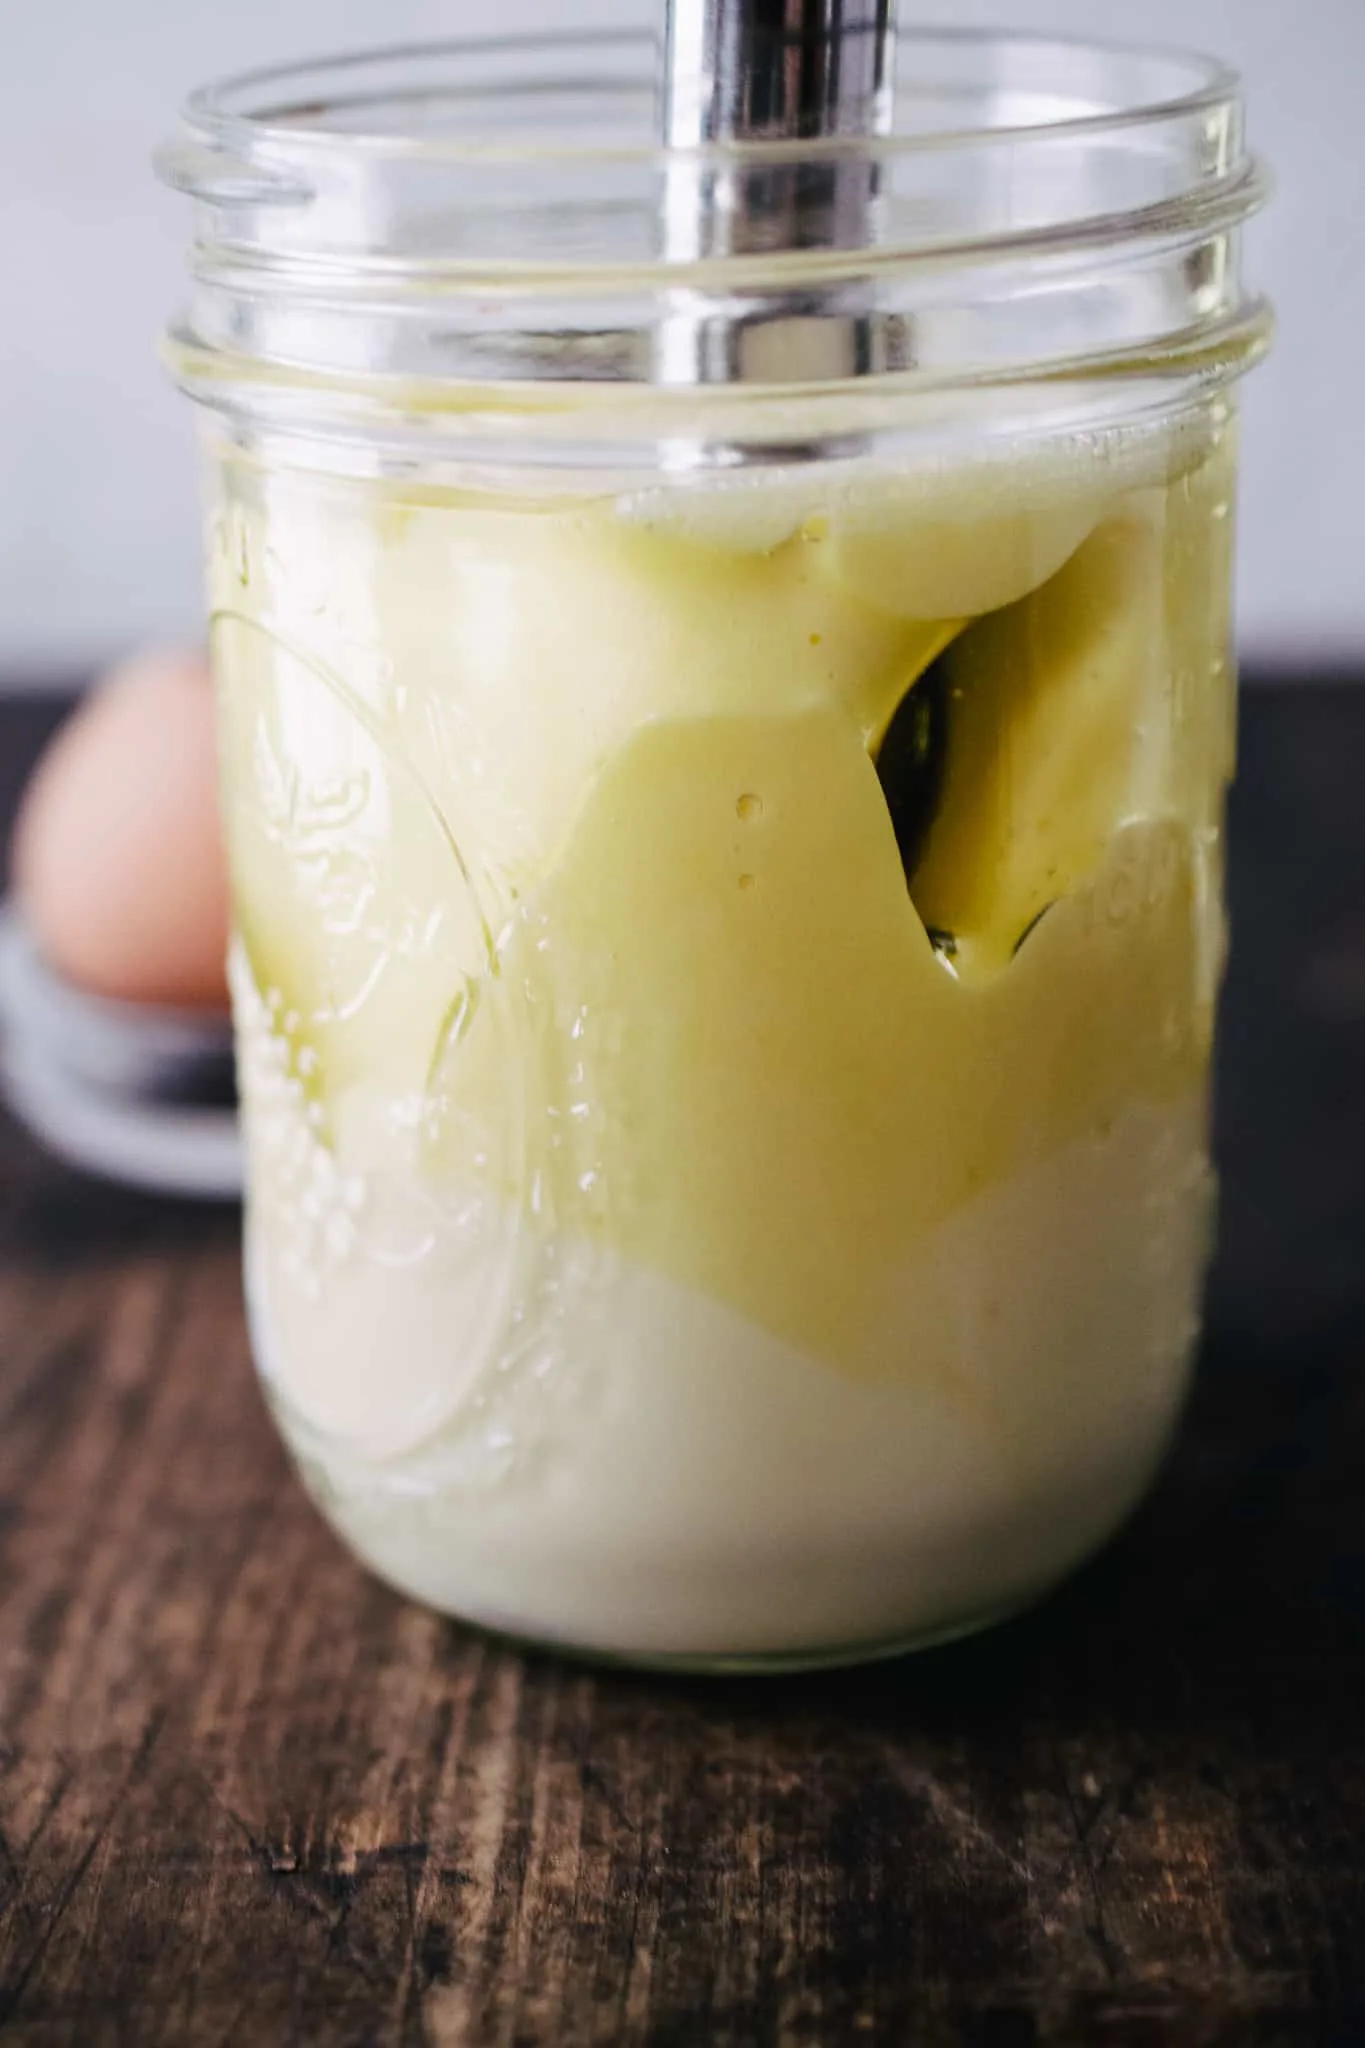 immersion blender in mason jar making homemade mayonnaise on dark wooden surface with white stone backdrop